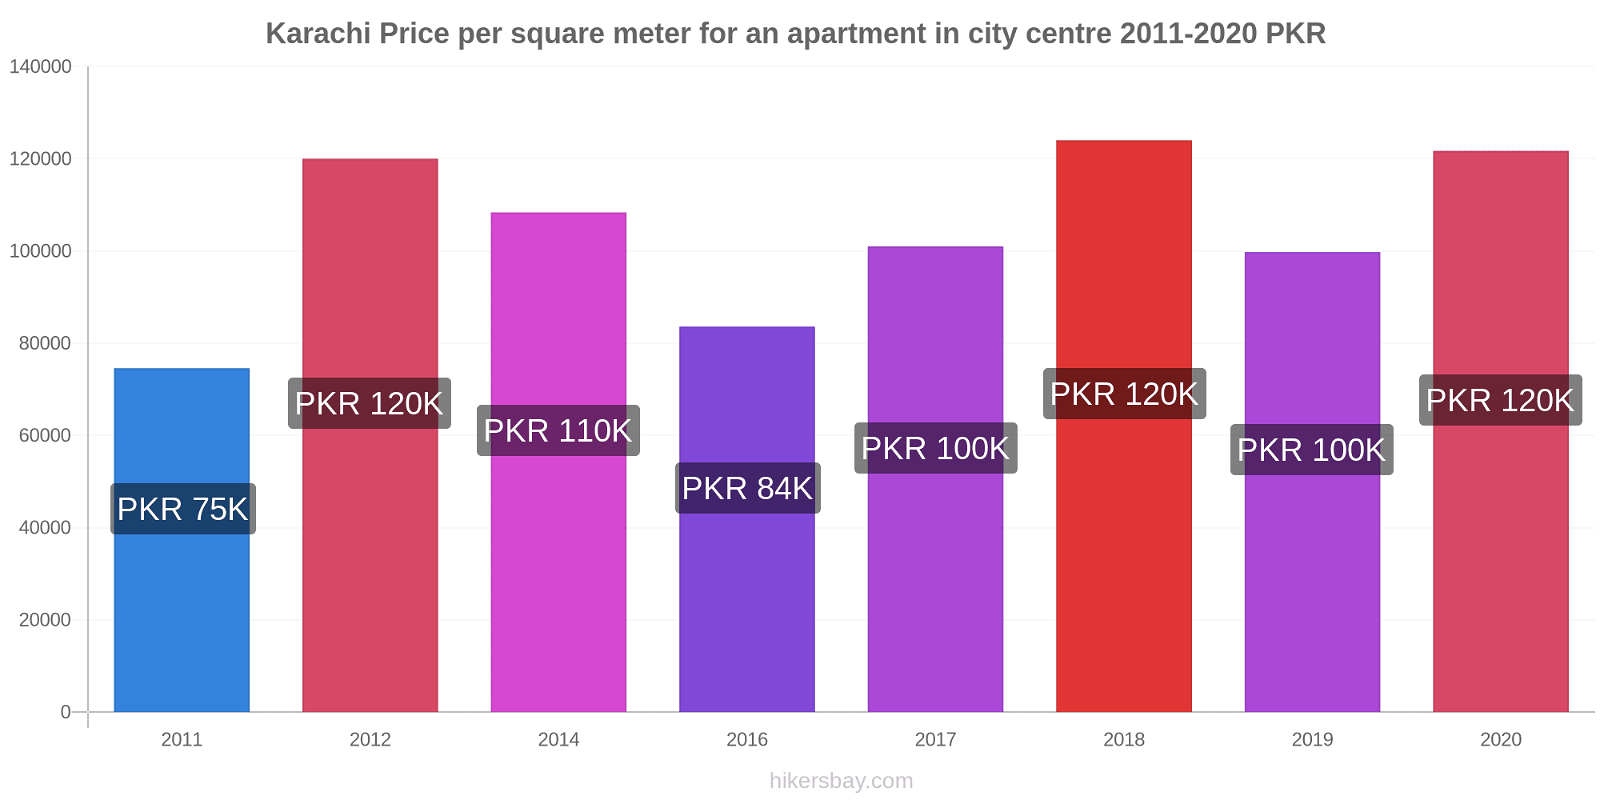 Karachi price changes Price per square meter for an apartment in city centre hikersbay.com